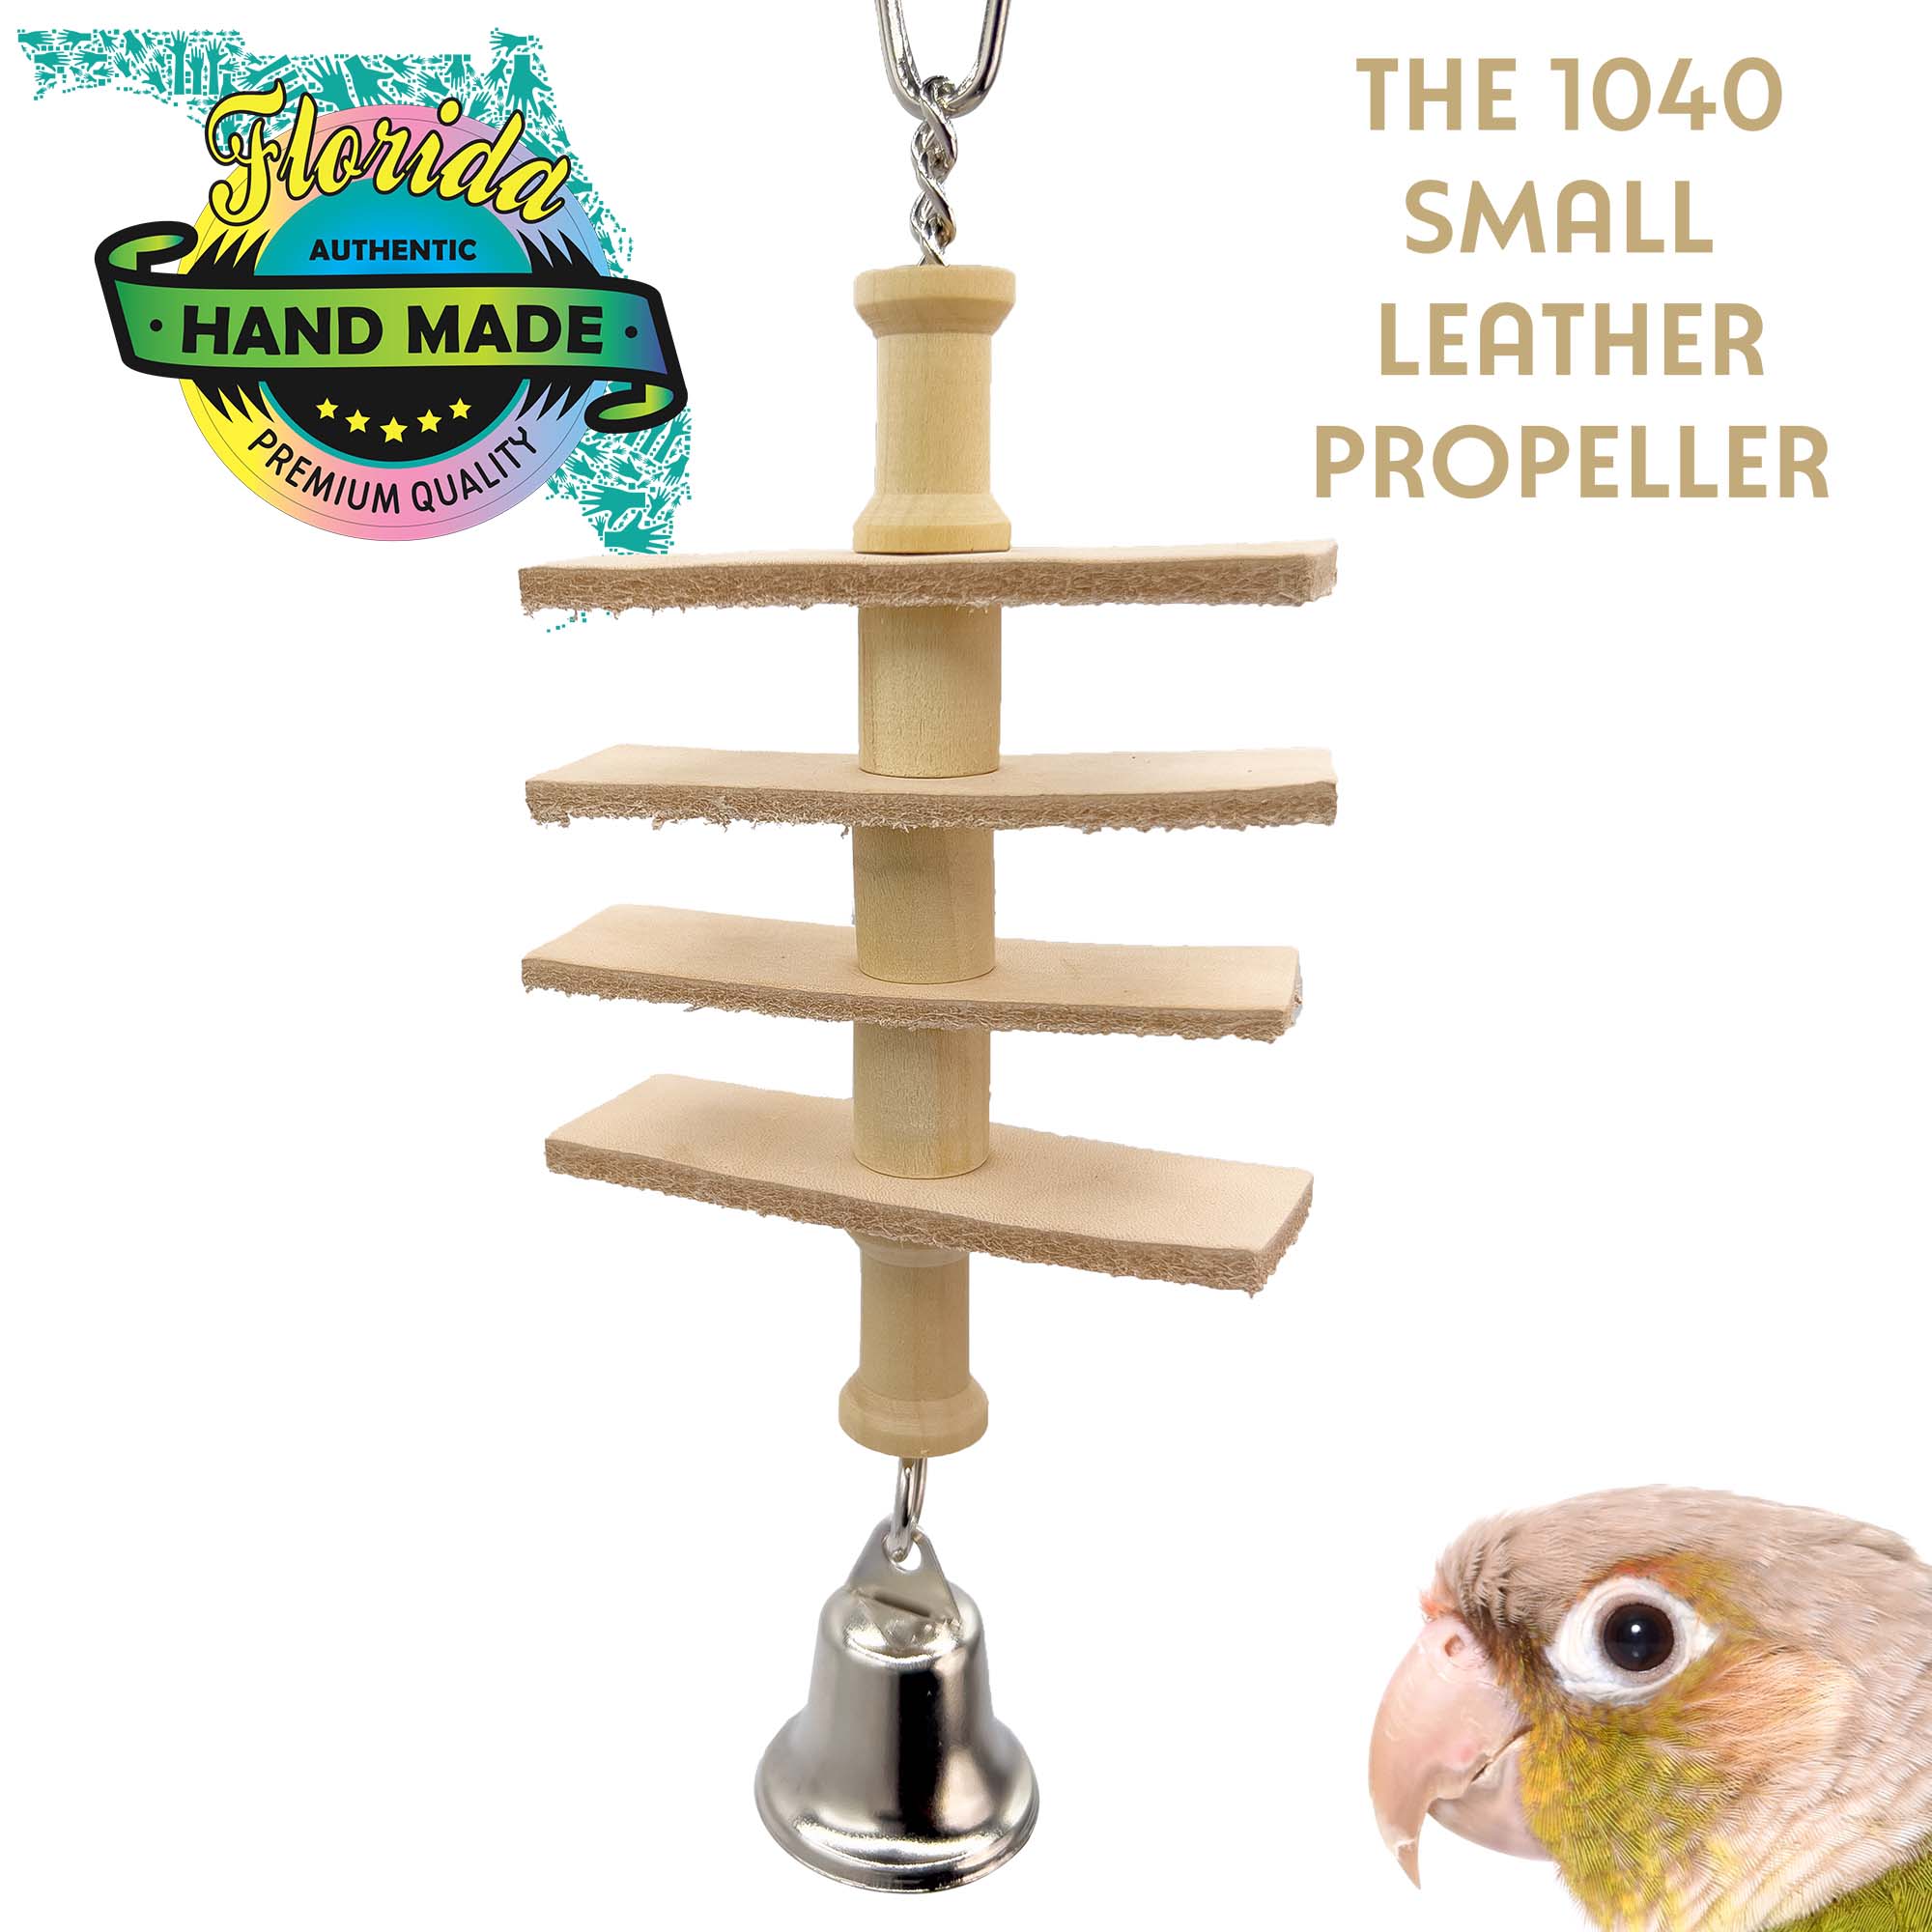 1040 Small Leather Propeller